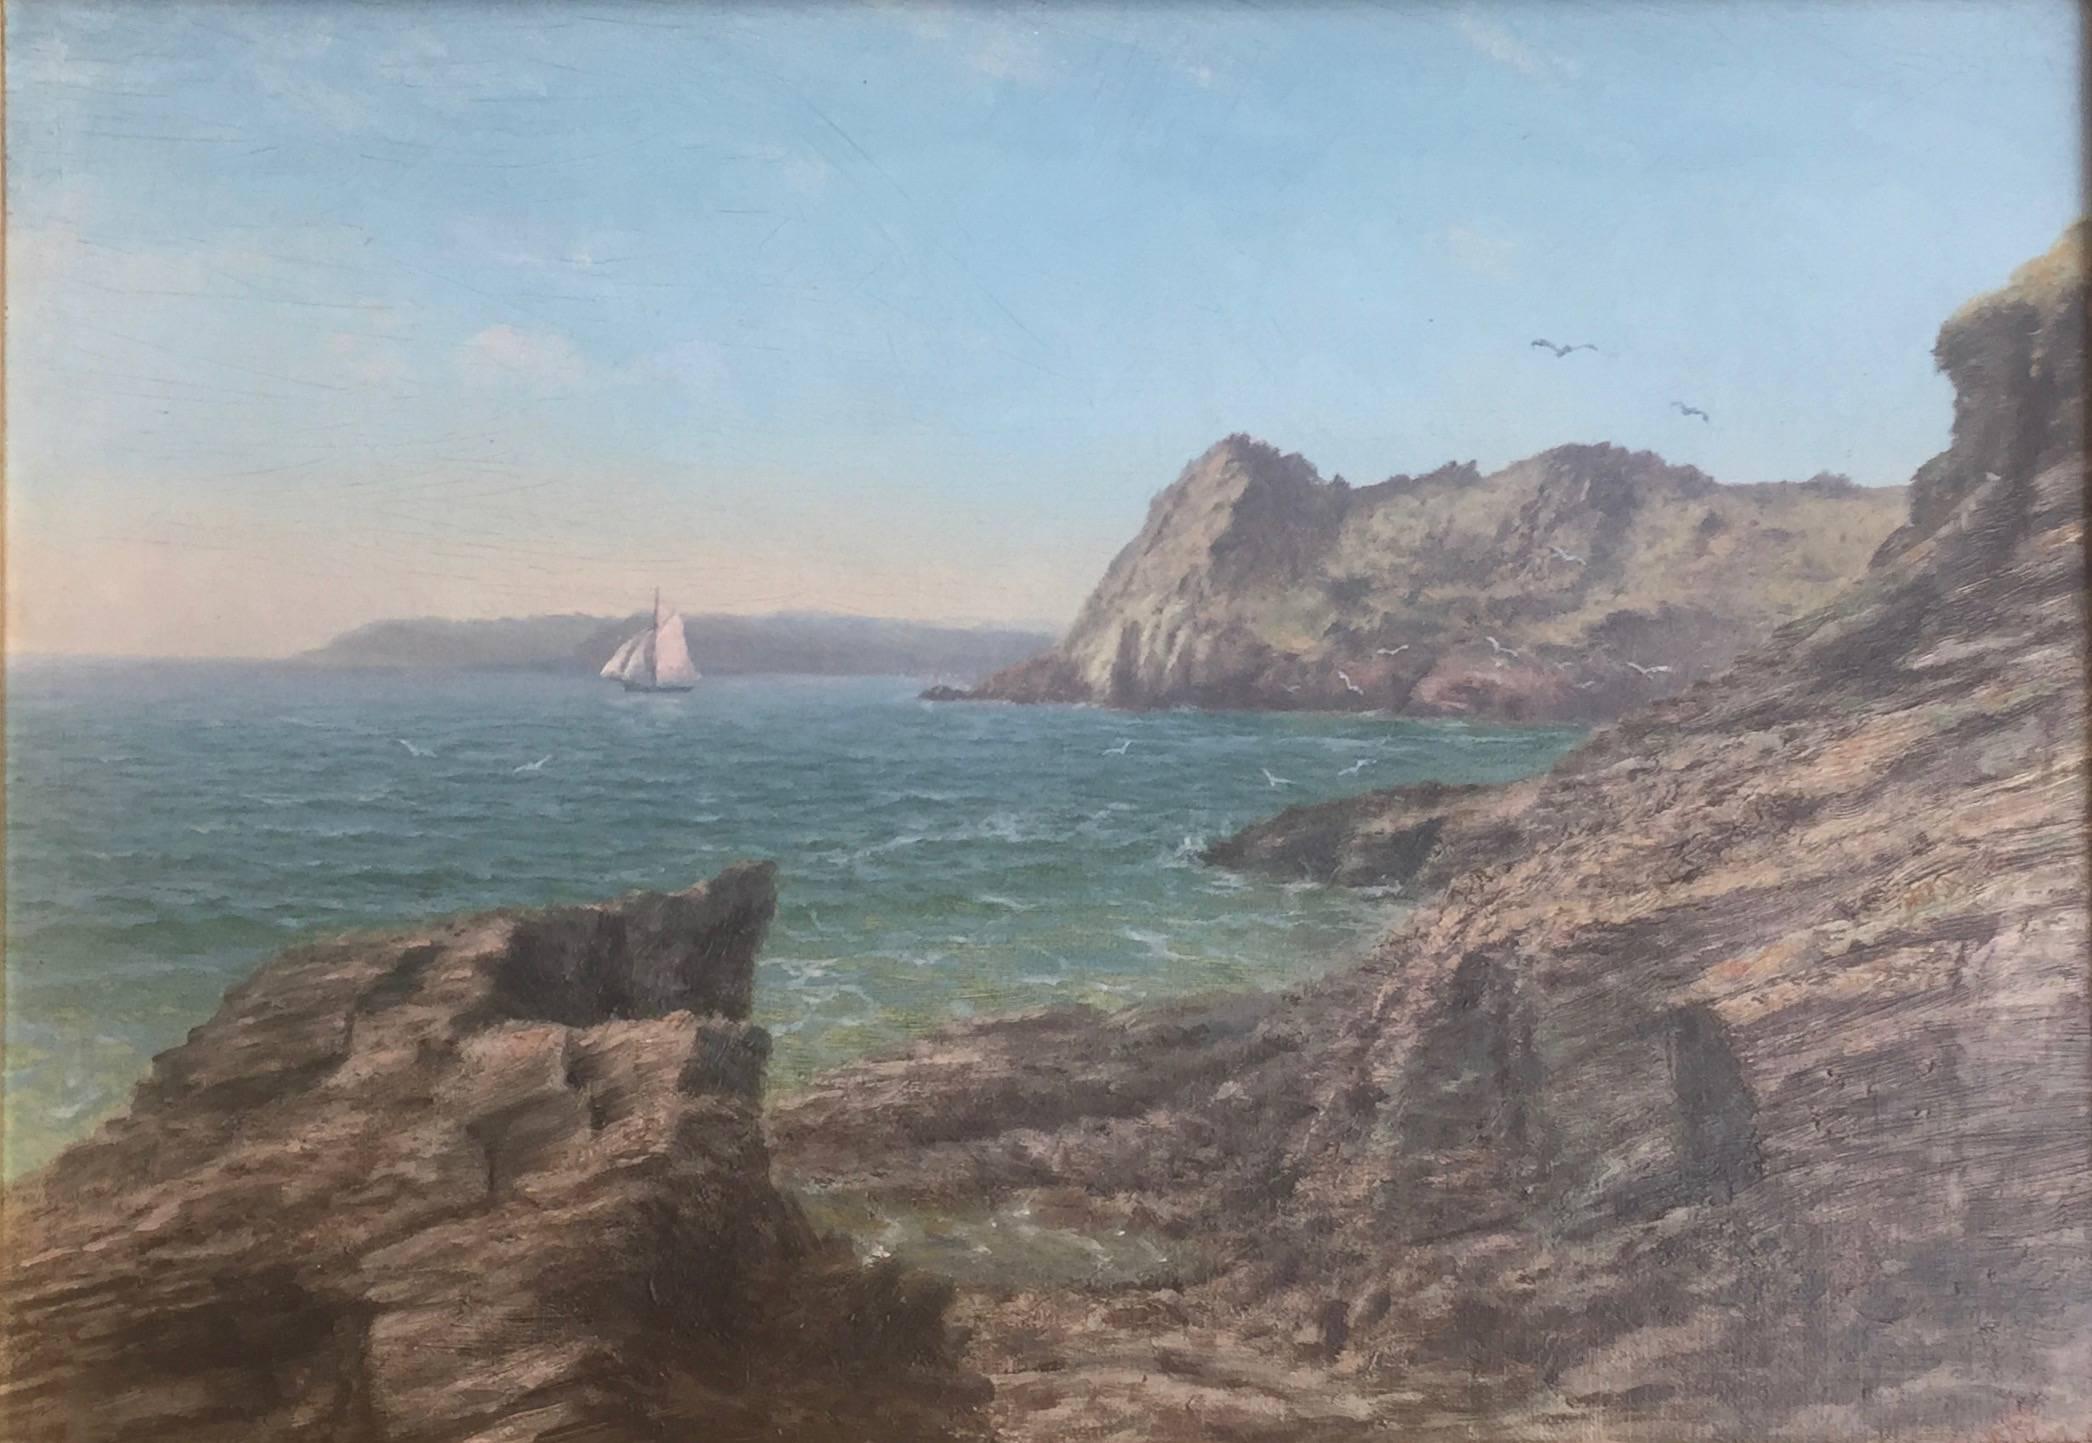 Victorian 19th century English shoreline scene in Cornwall, UK - Painting by Charles Ede